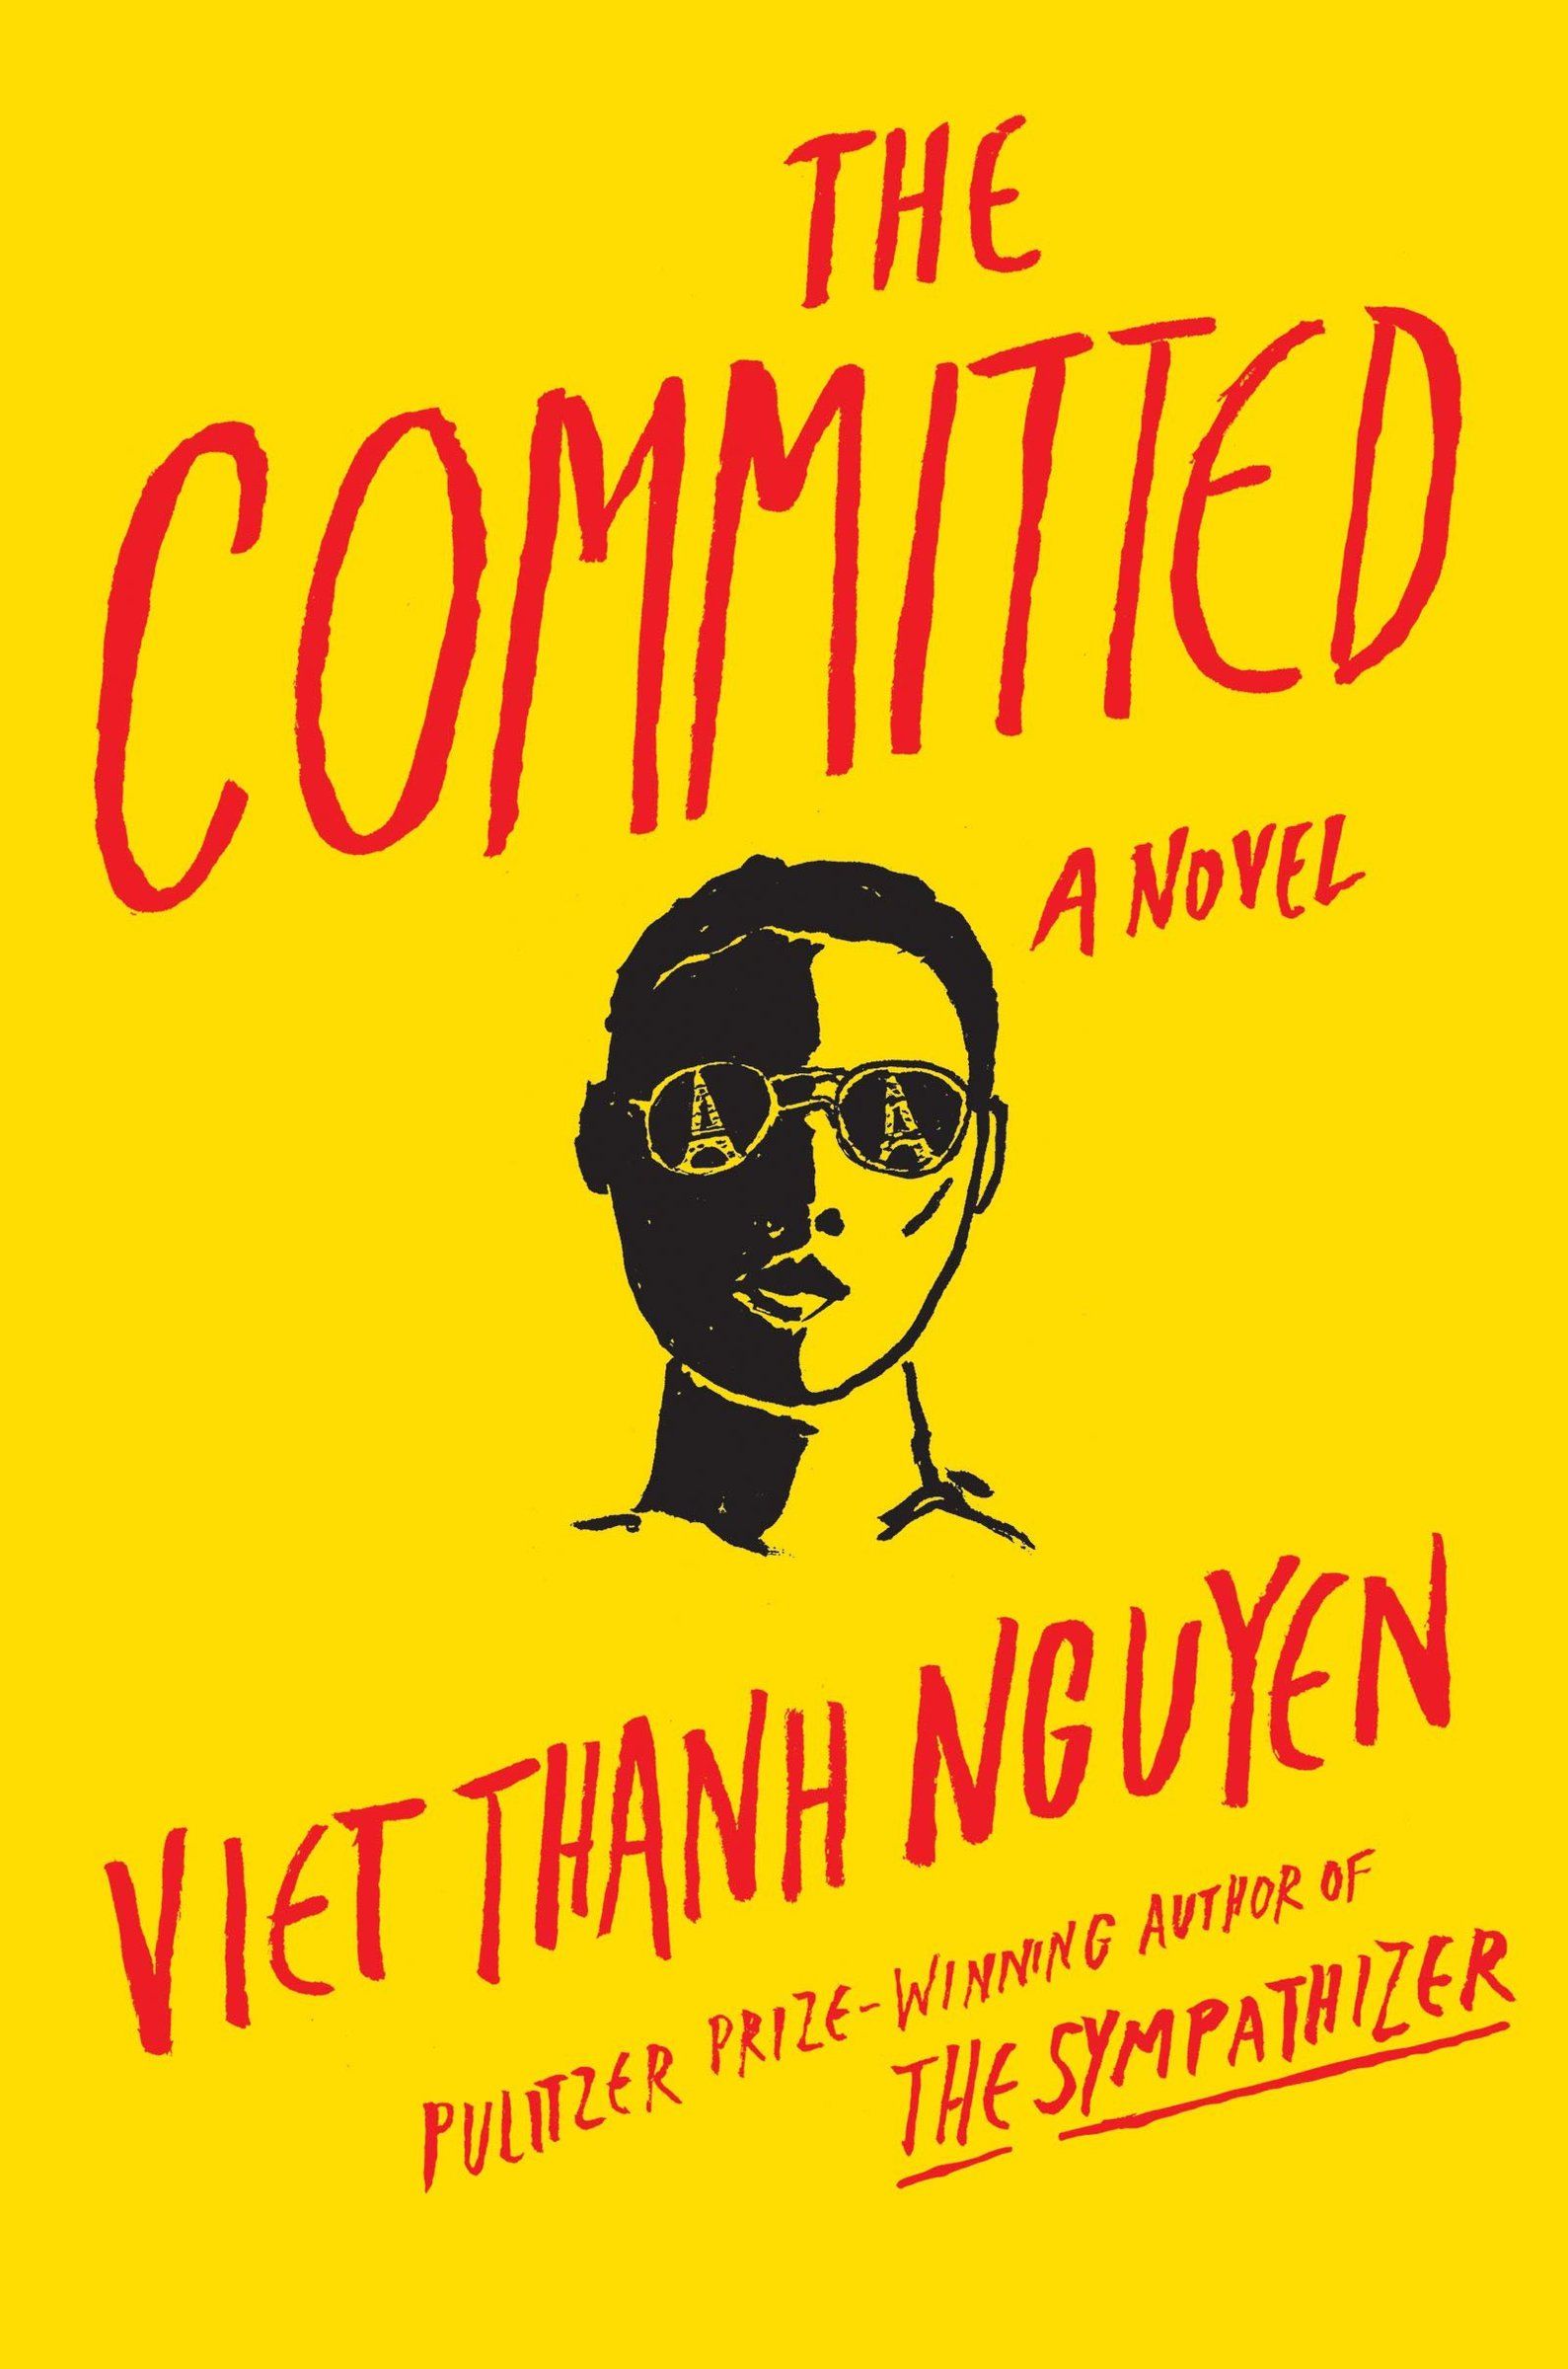 Viet Thanh Nguyen's sequel 'The Committed' is sharp